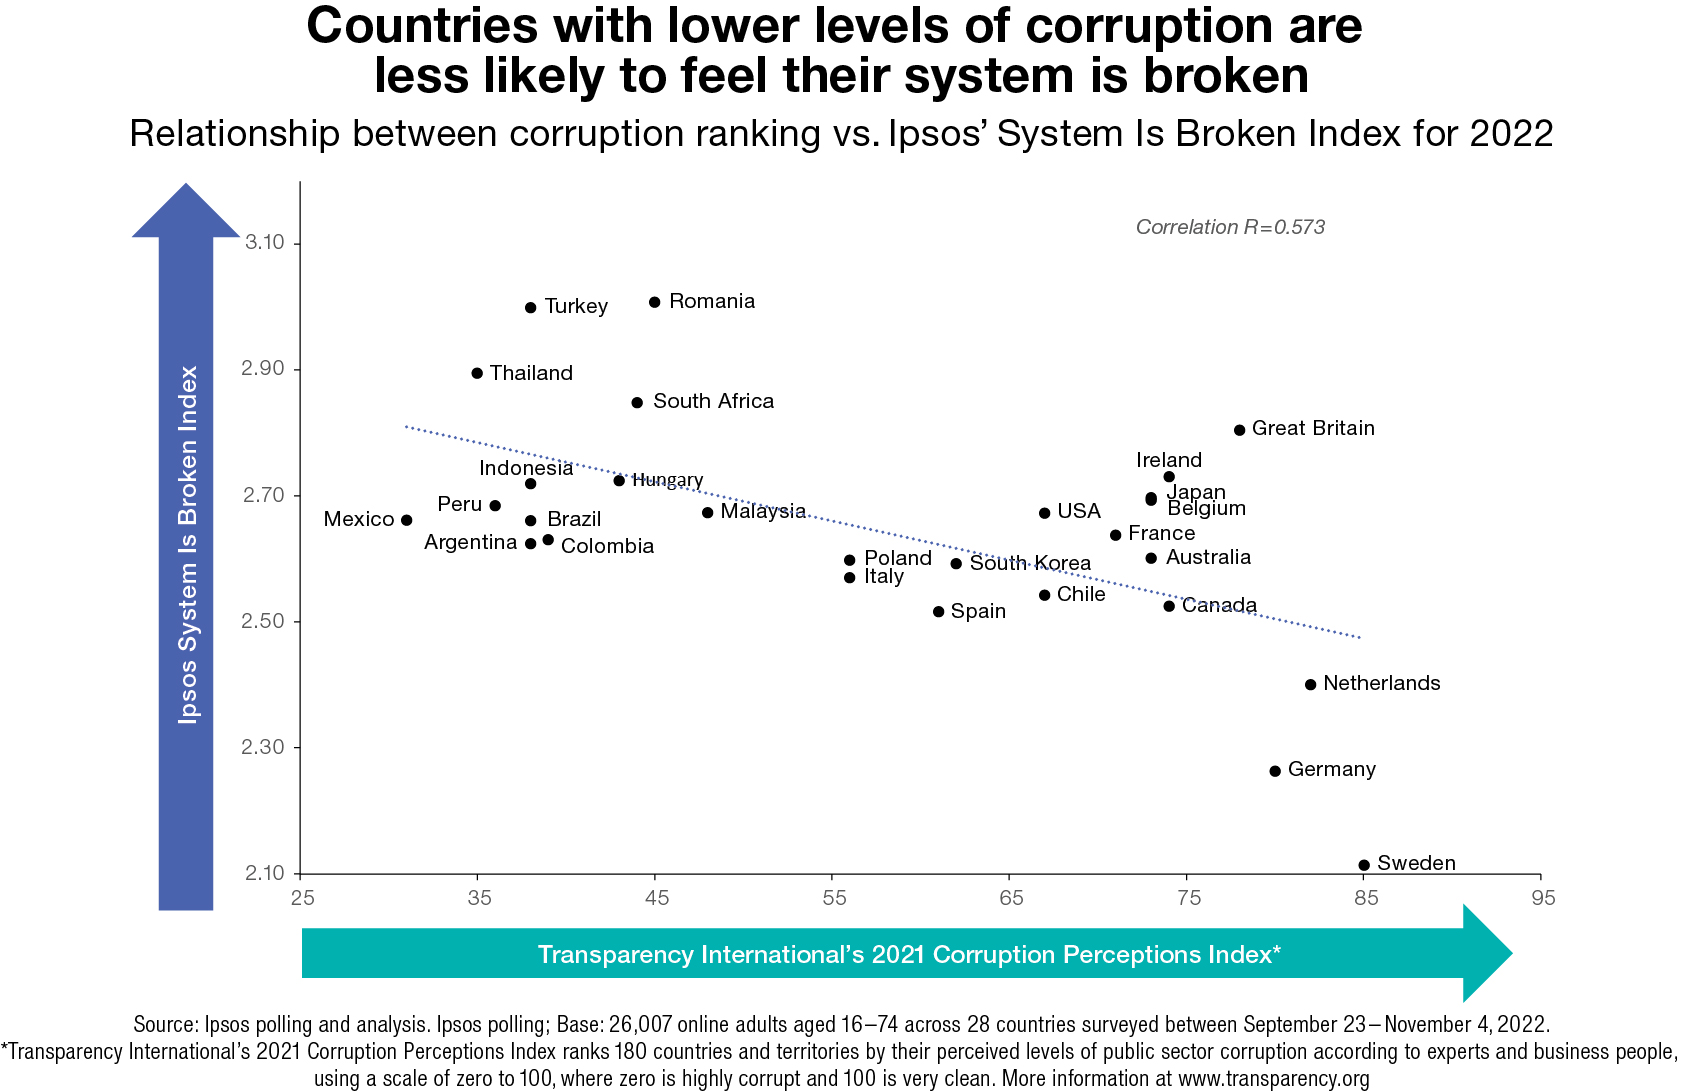 Countries with lower levels of corruption are less likely to feel their system is broken